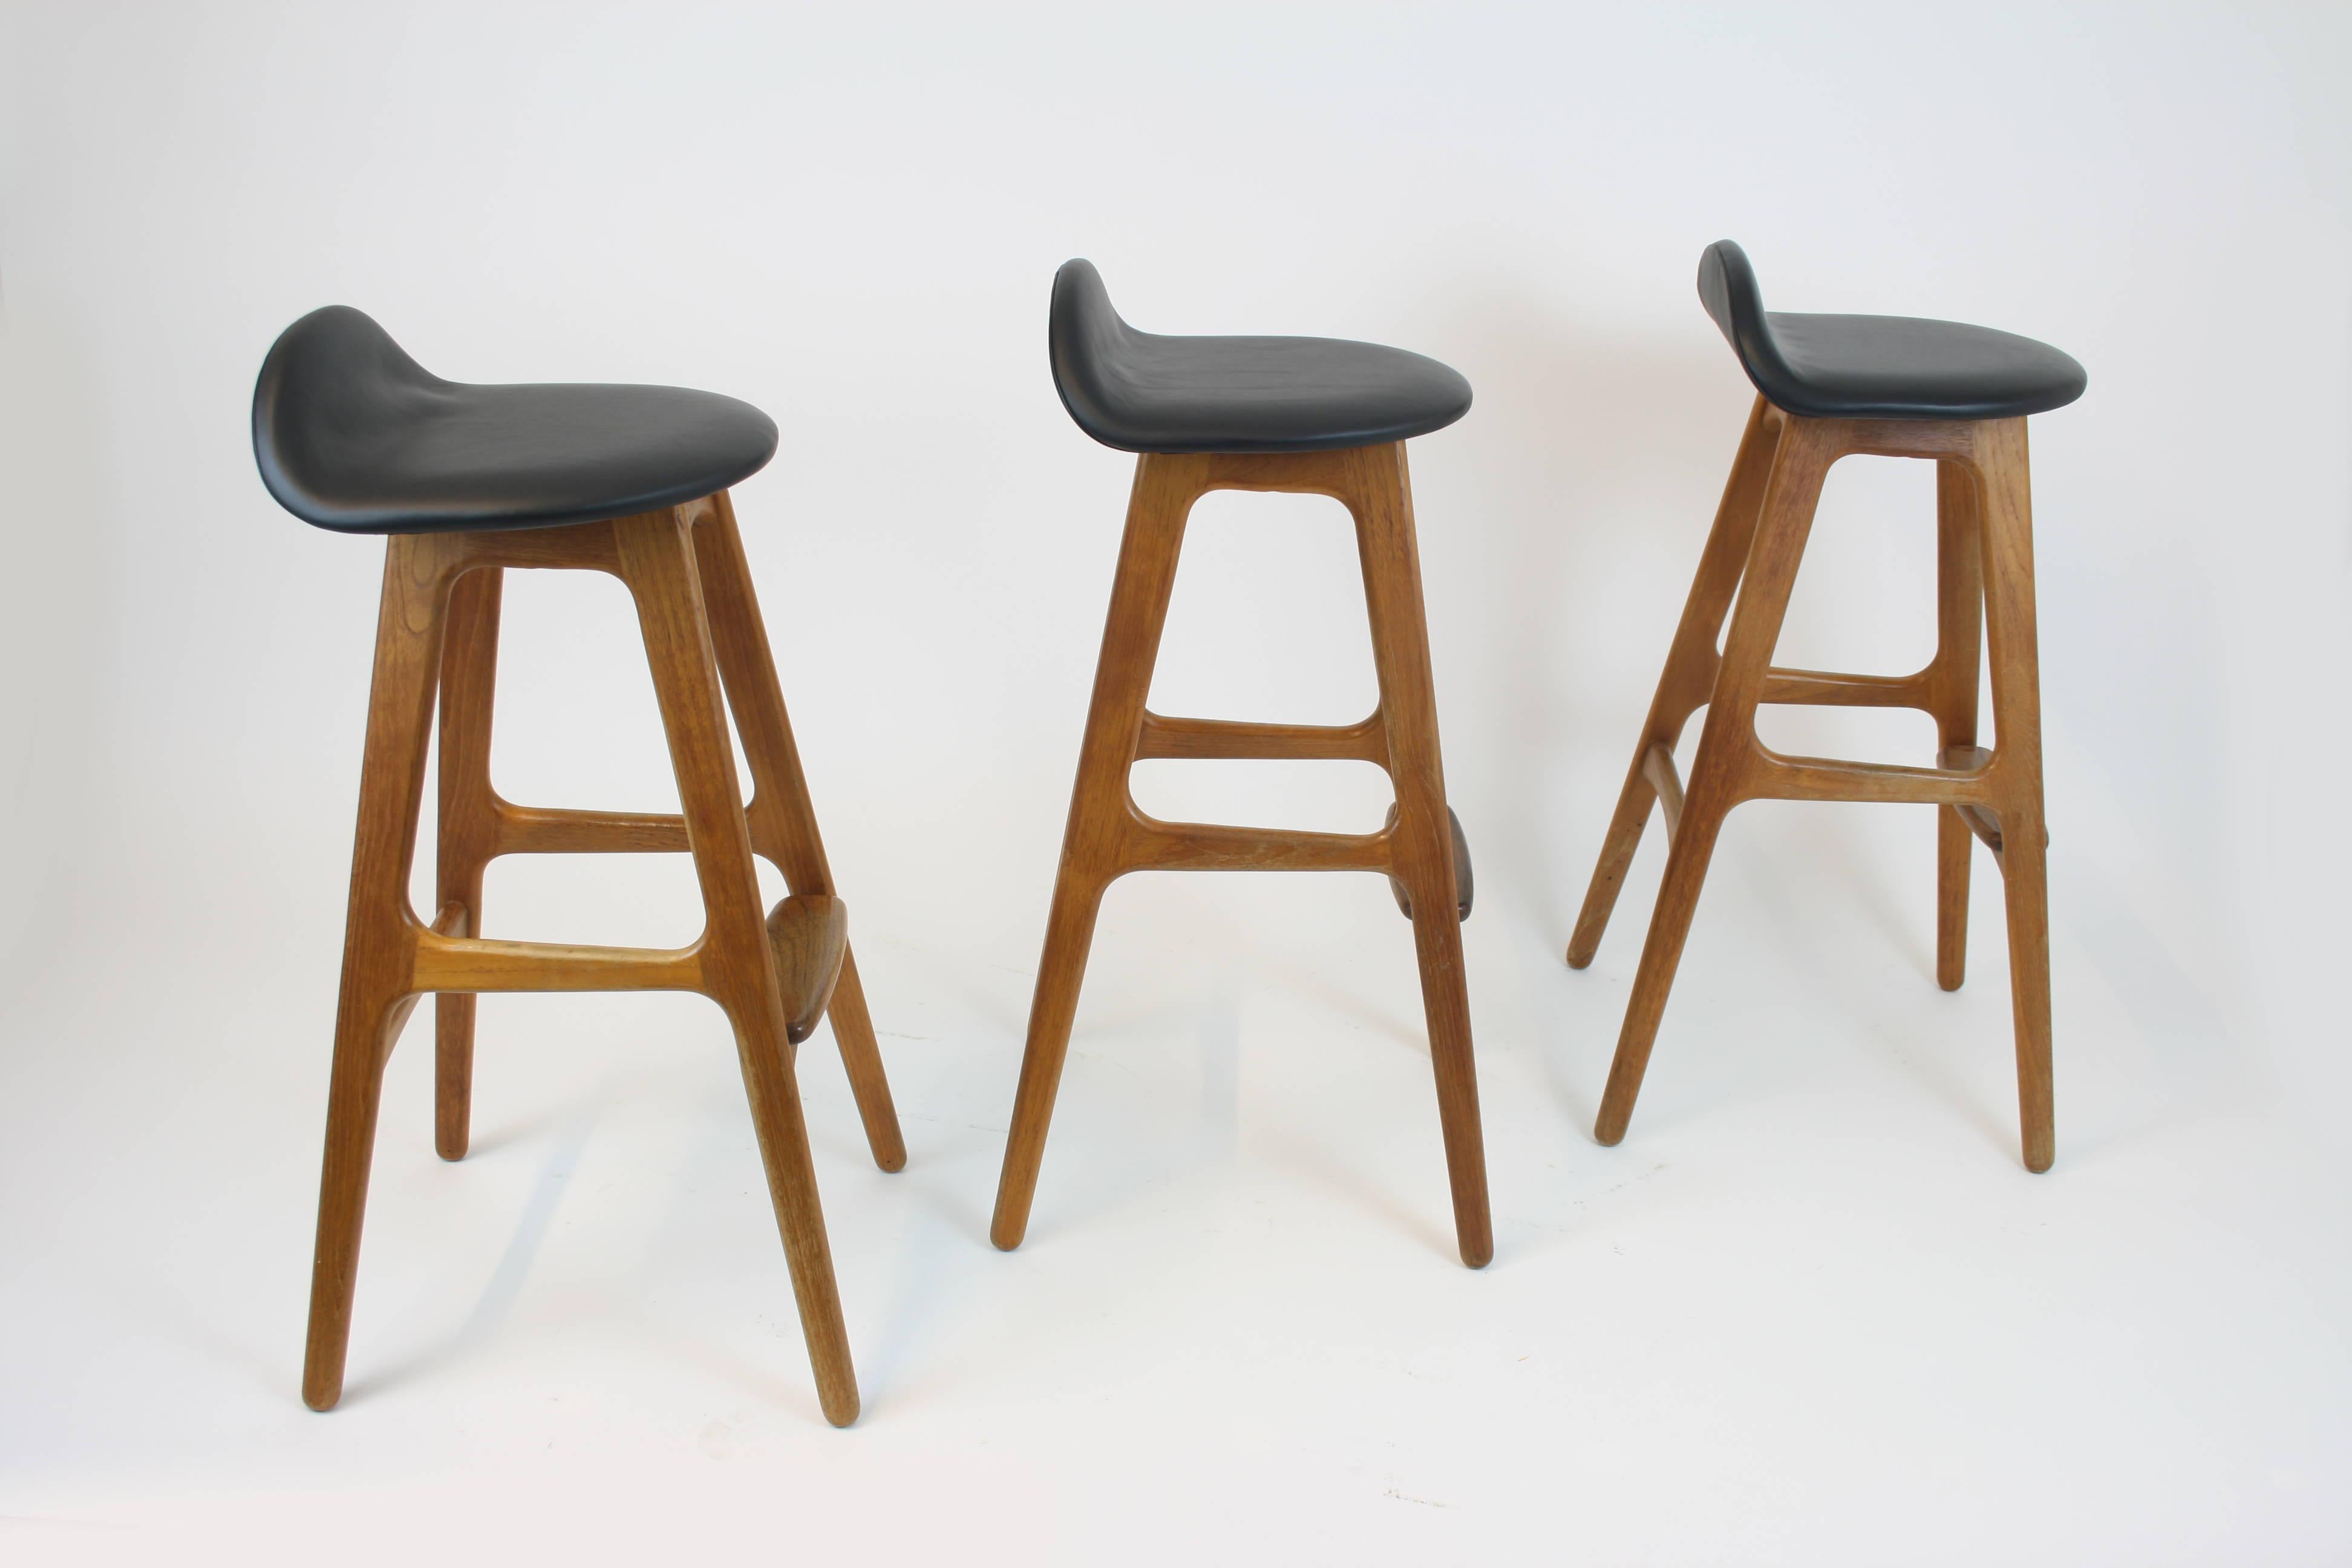 Three bar stools by the Danish designer Erik Buch (pronounced: Buck), manufactured by the Odense furniture factory in the late 1950s. Our variant of the stool is made of solid teak wood and its seating newly upholstered with black leather. Their